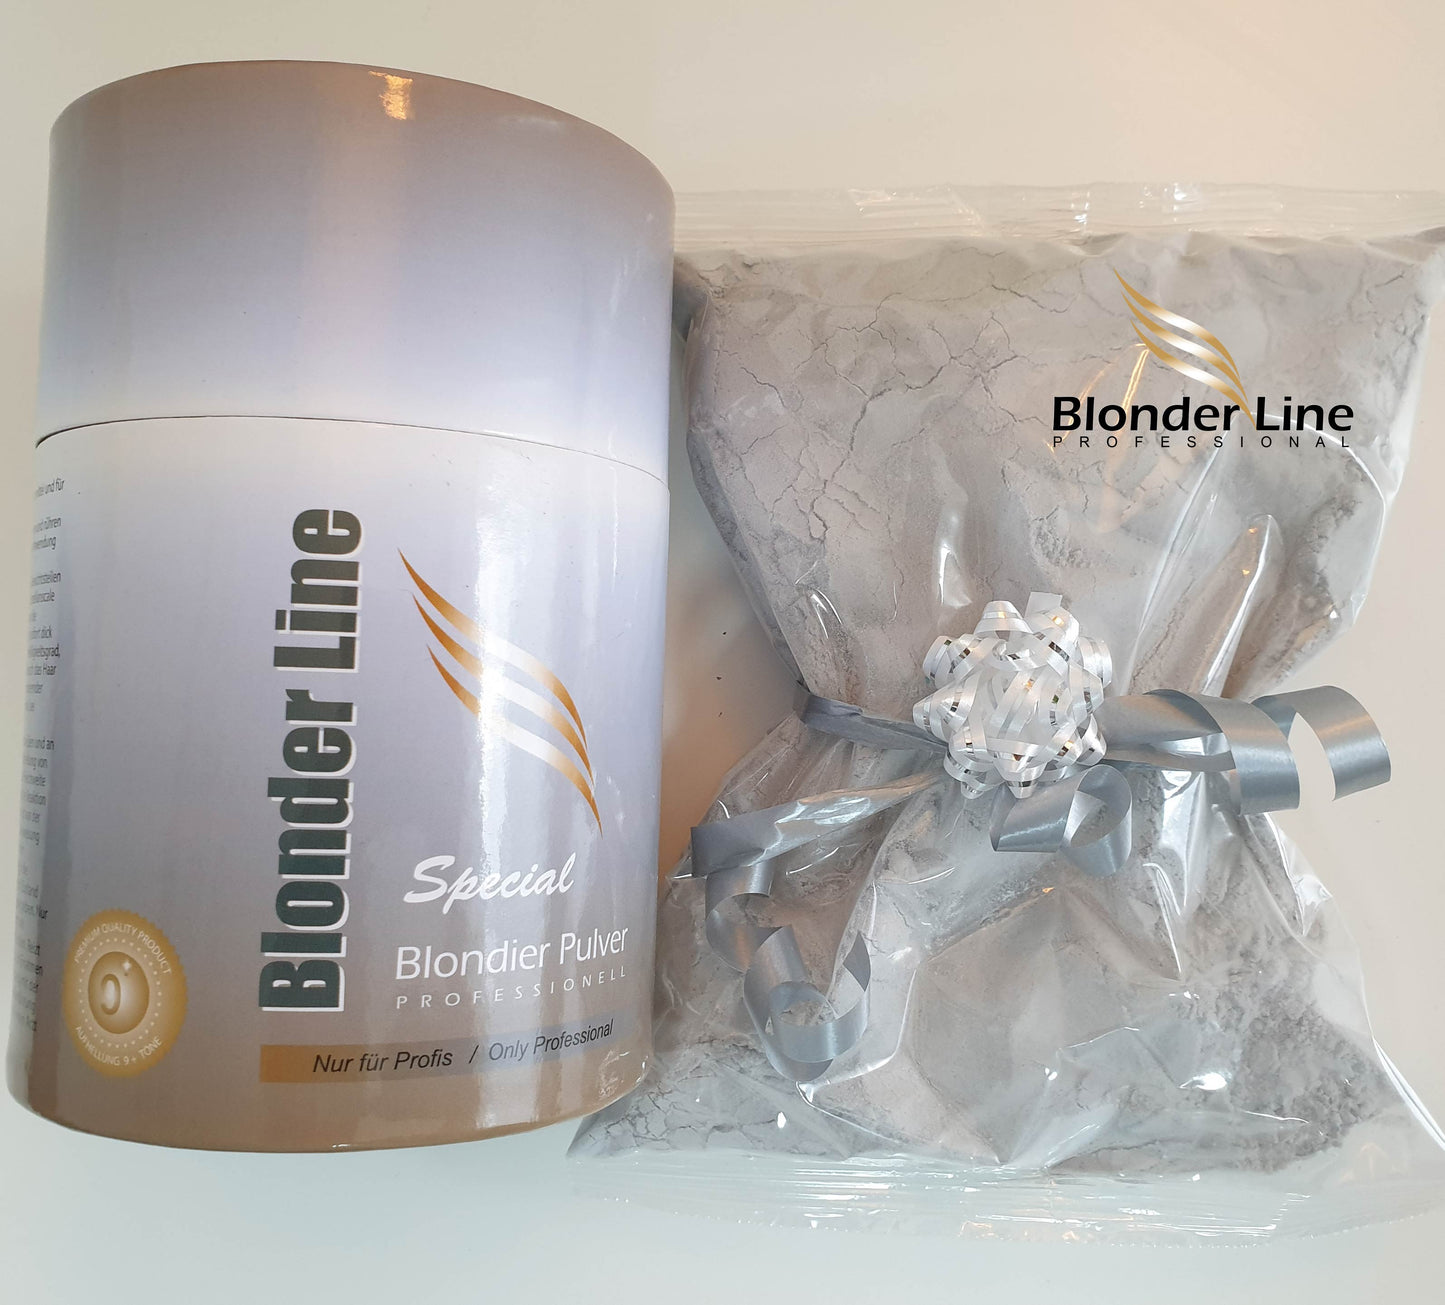 Gray bleaching whitening professional achieved over 9 levels